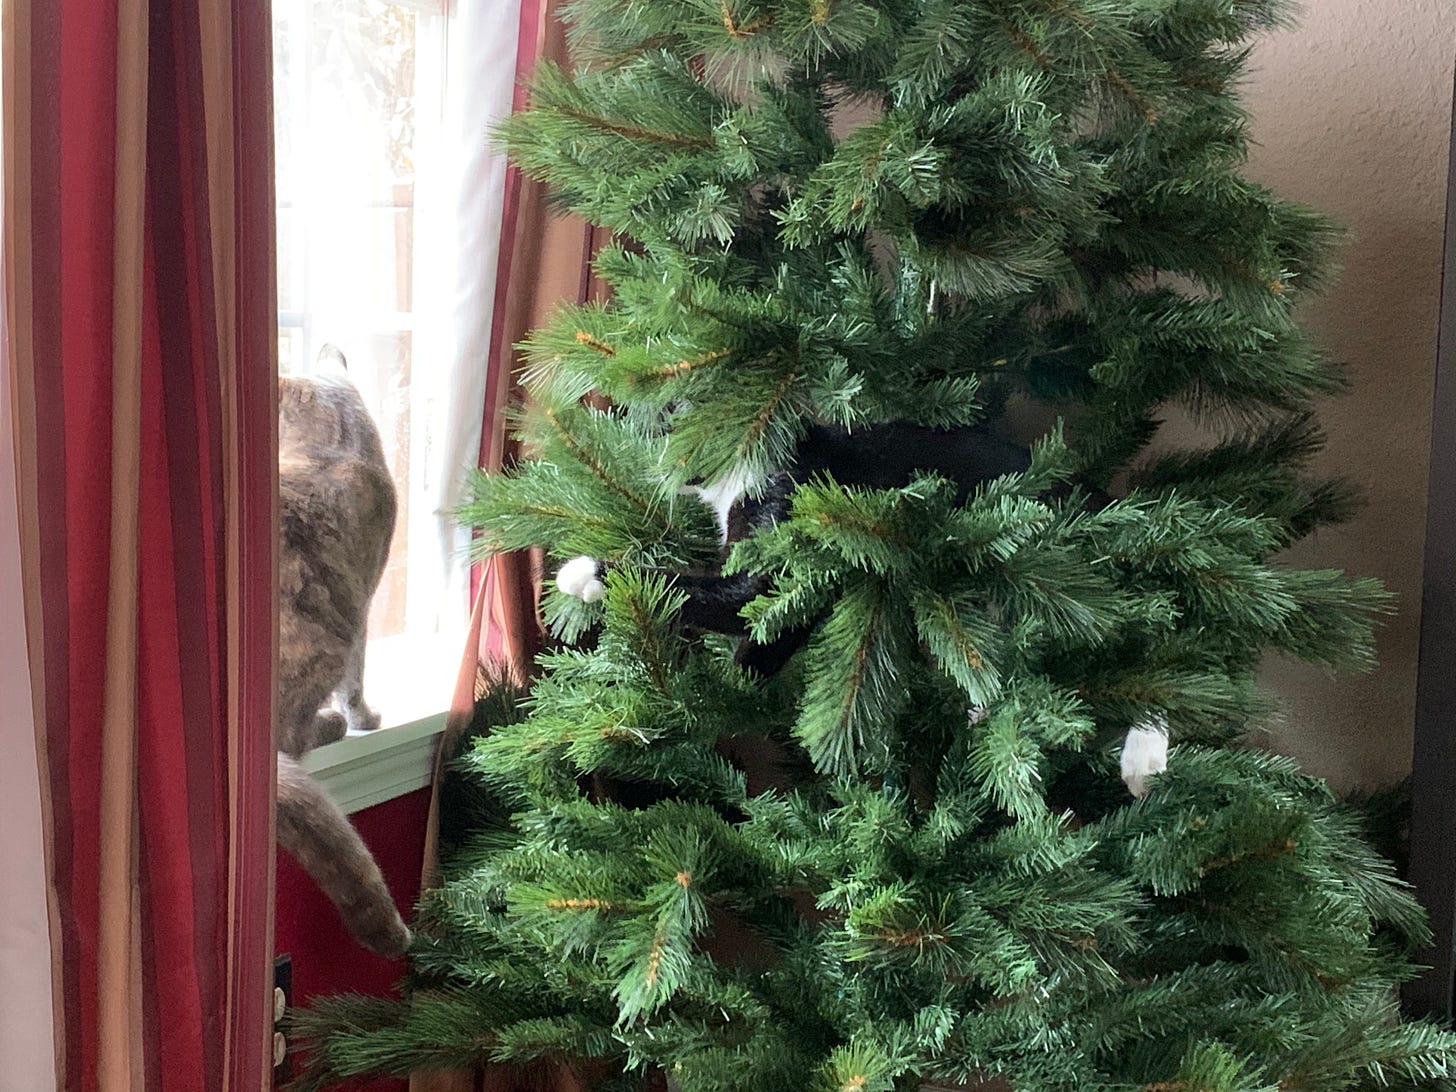 Left: a dilute tortoiseshell cat is sitting calmly on a white windowsill, looking out the window. Right: an artificial Christmas tree through the branches of which a tuxedo cat’s head and paws are vaguely visible.